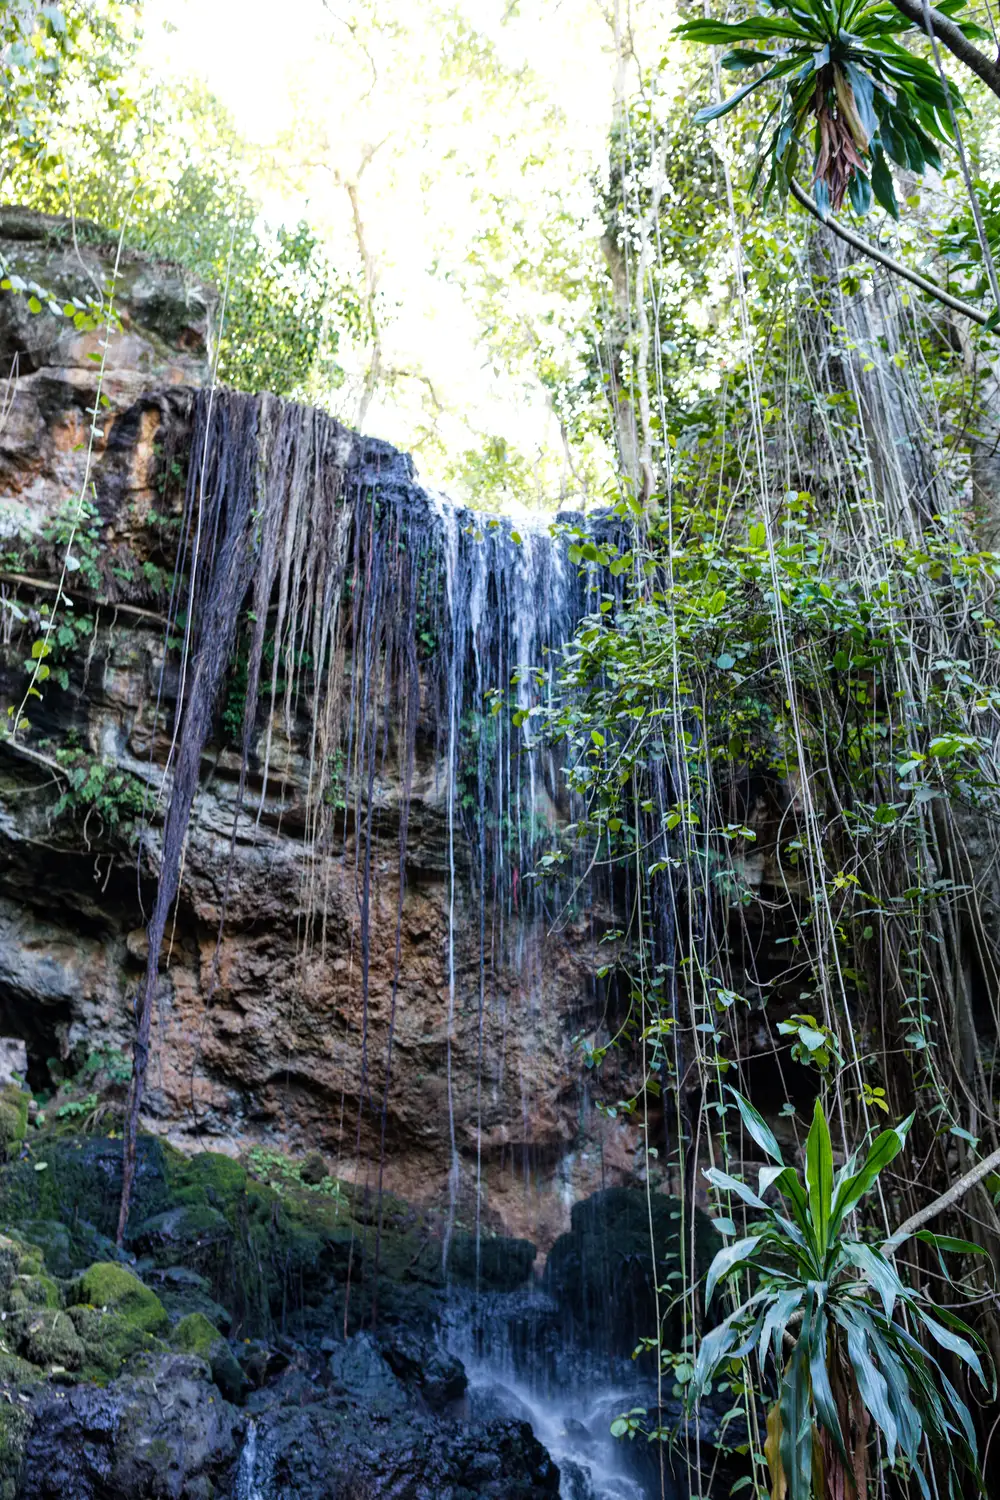 Waterfall and trees viewed from below